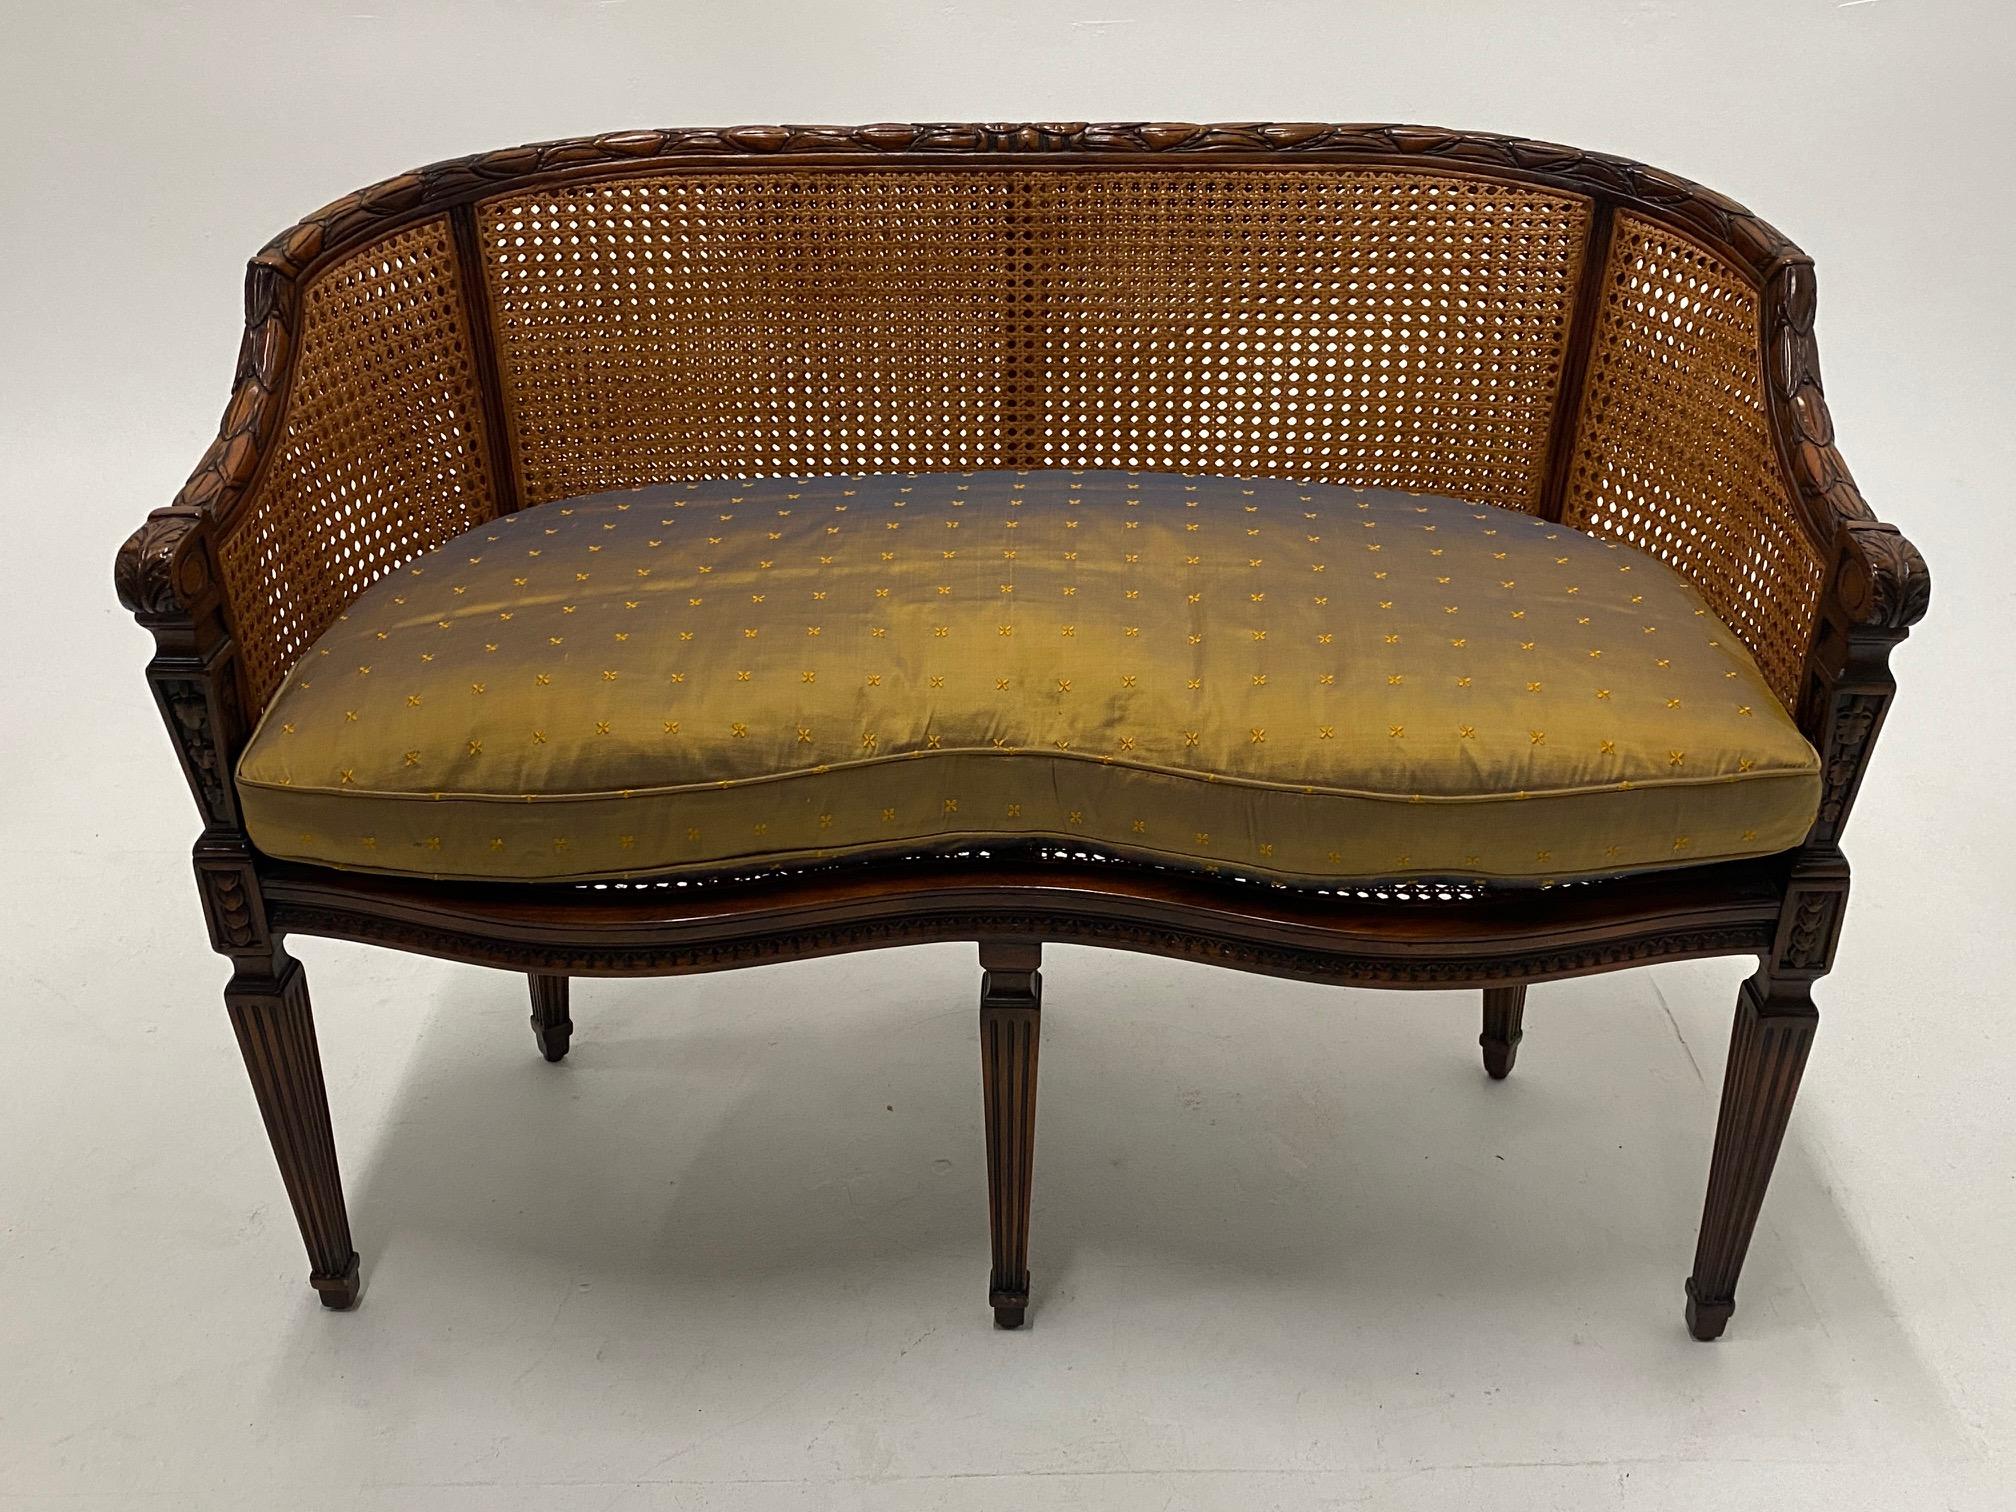 Lovely curved French carved mahogany and caned loveseat having plush silk seat cushion filled with down.
Seat height without custom cushion 17